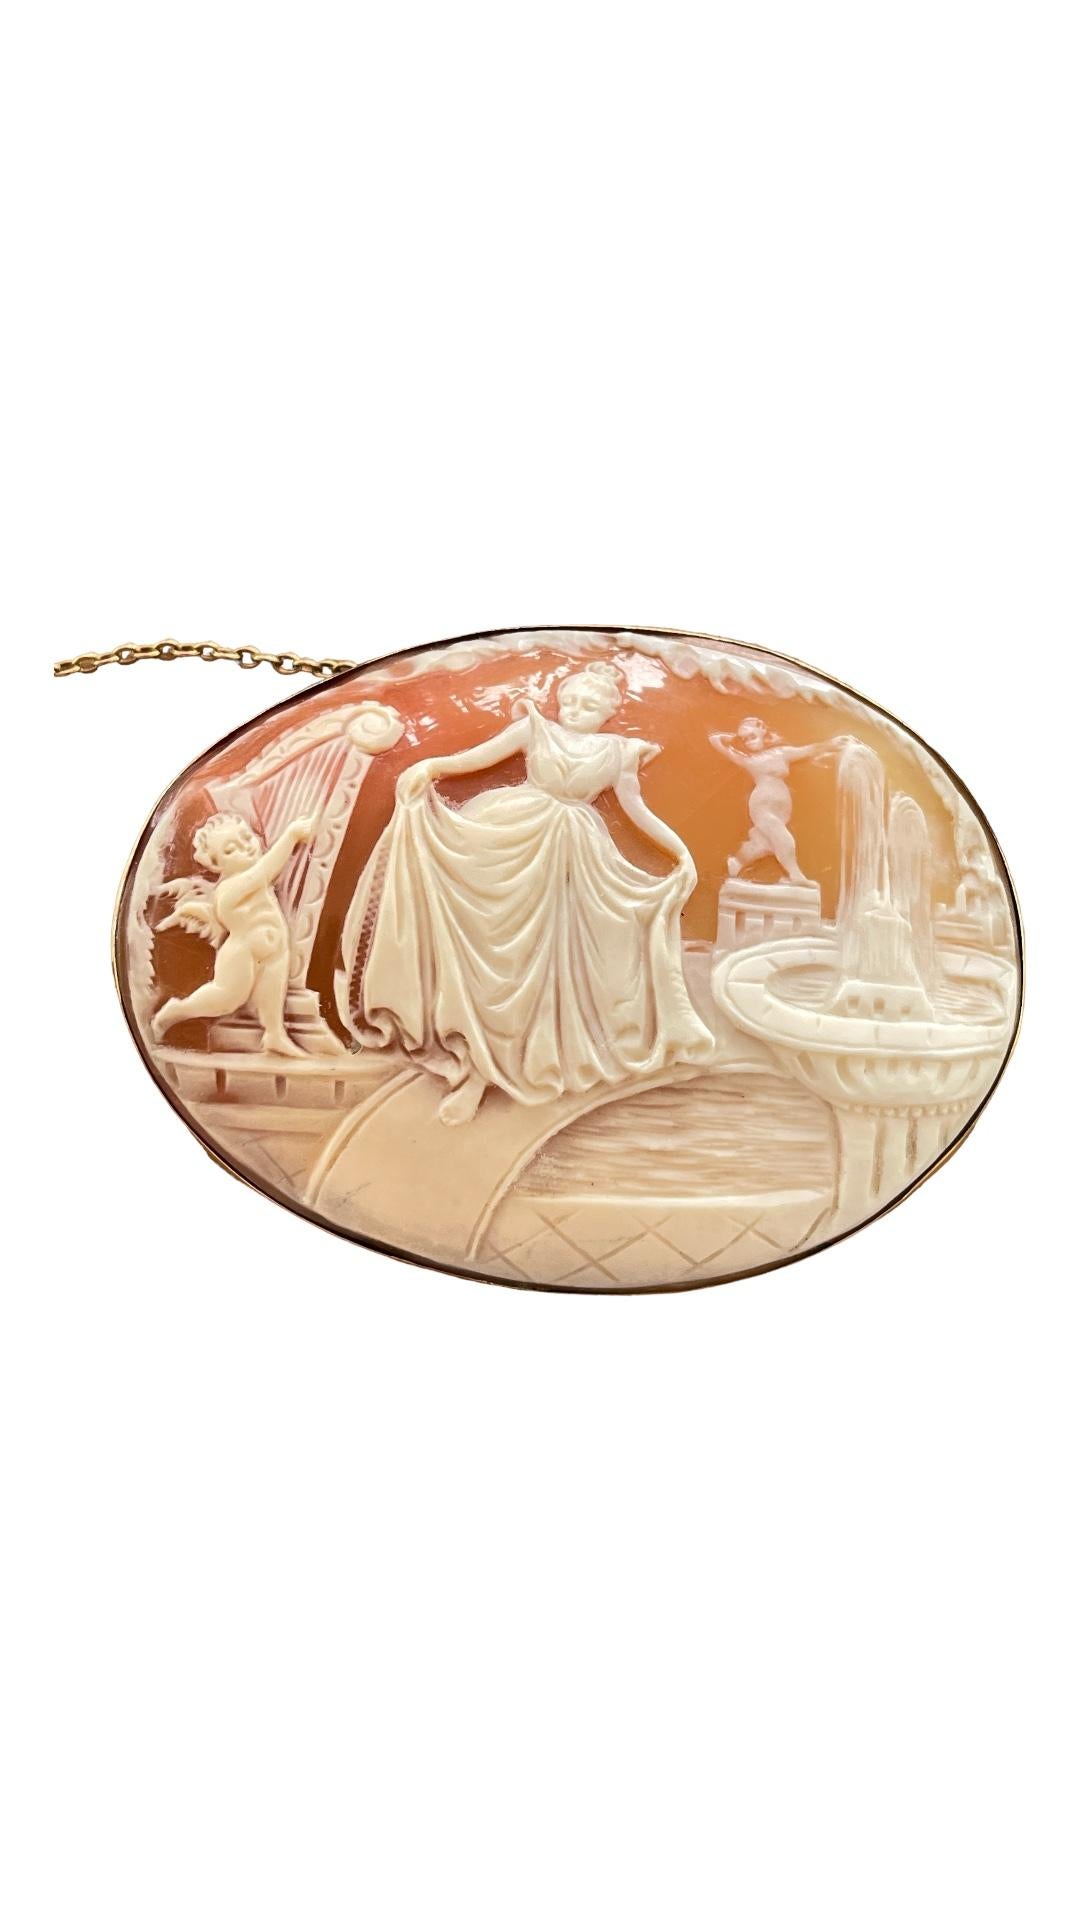 Large Romantic Cameo Brooch Neo Classic lady in a Garden 14ct yellow gold c1950s In Good Condition For Sale In Mona Vale, NSW